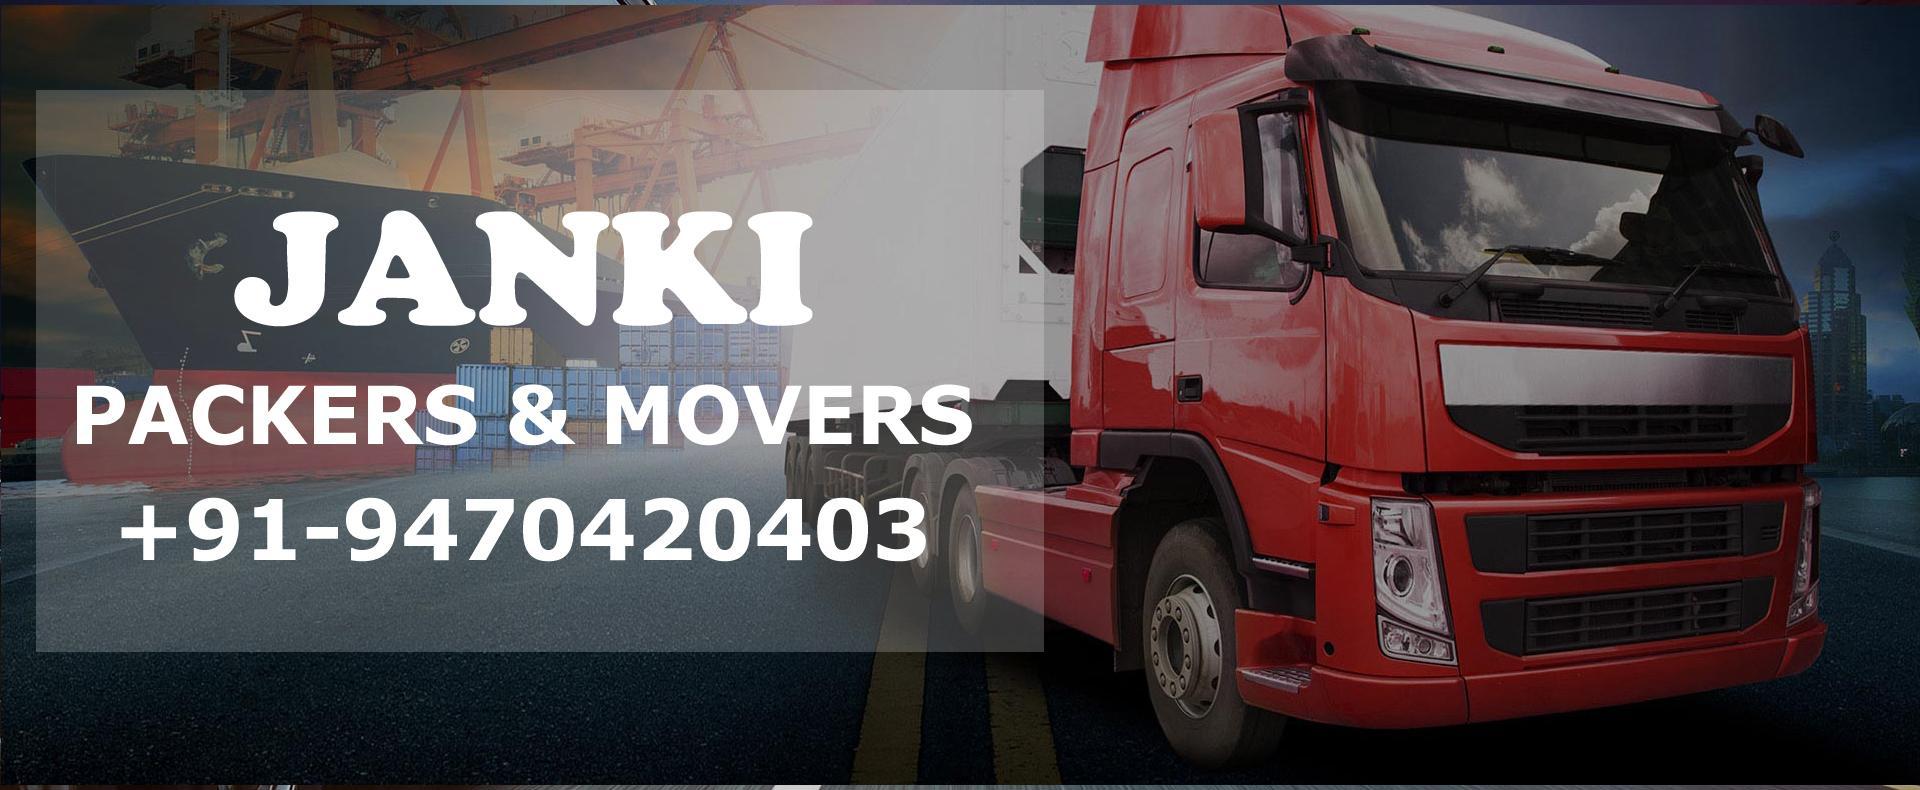 Home Page Banner-Janki Packers and Movers